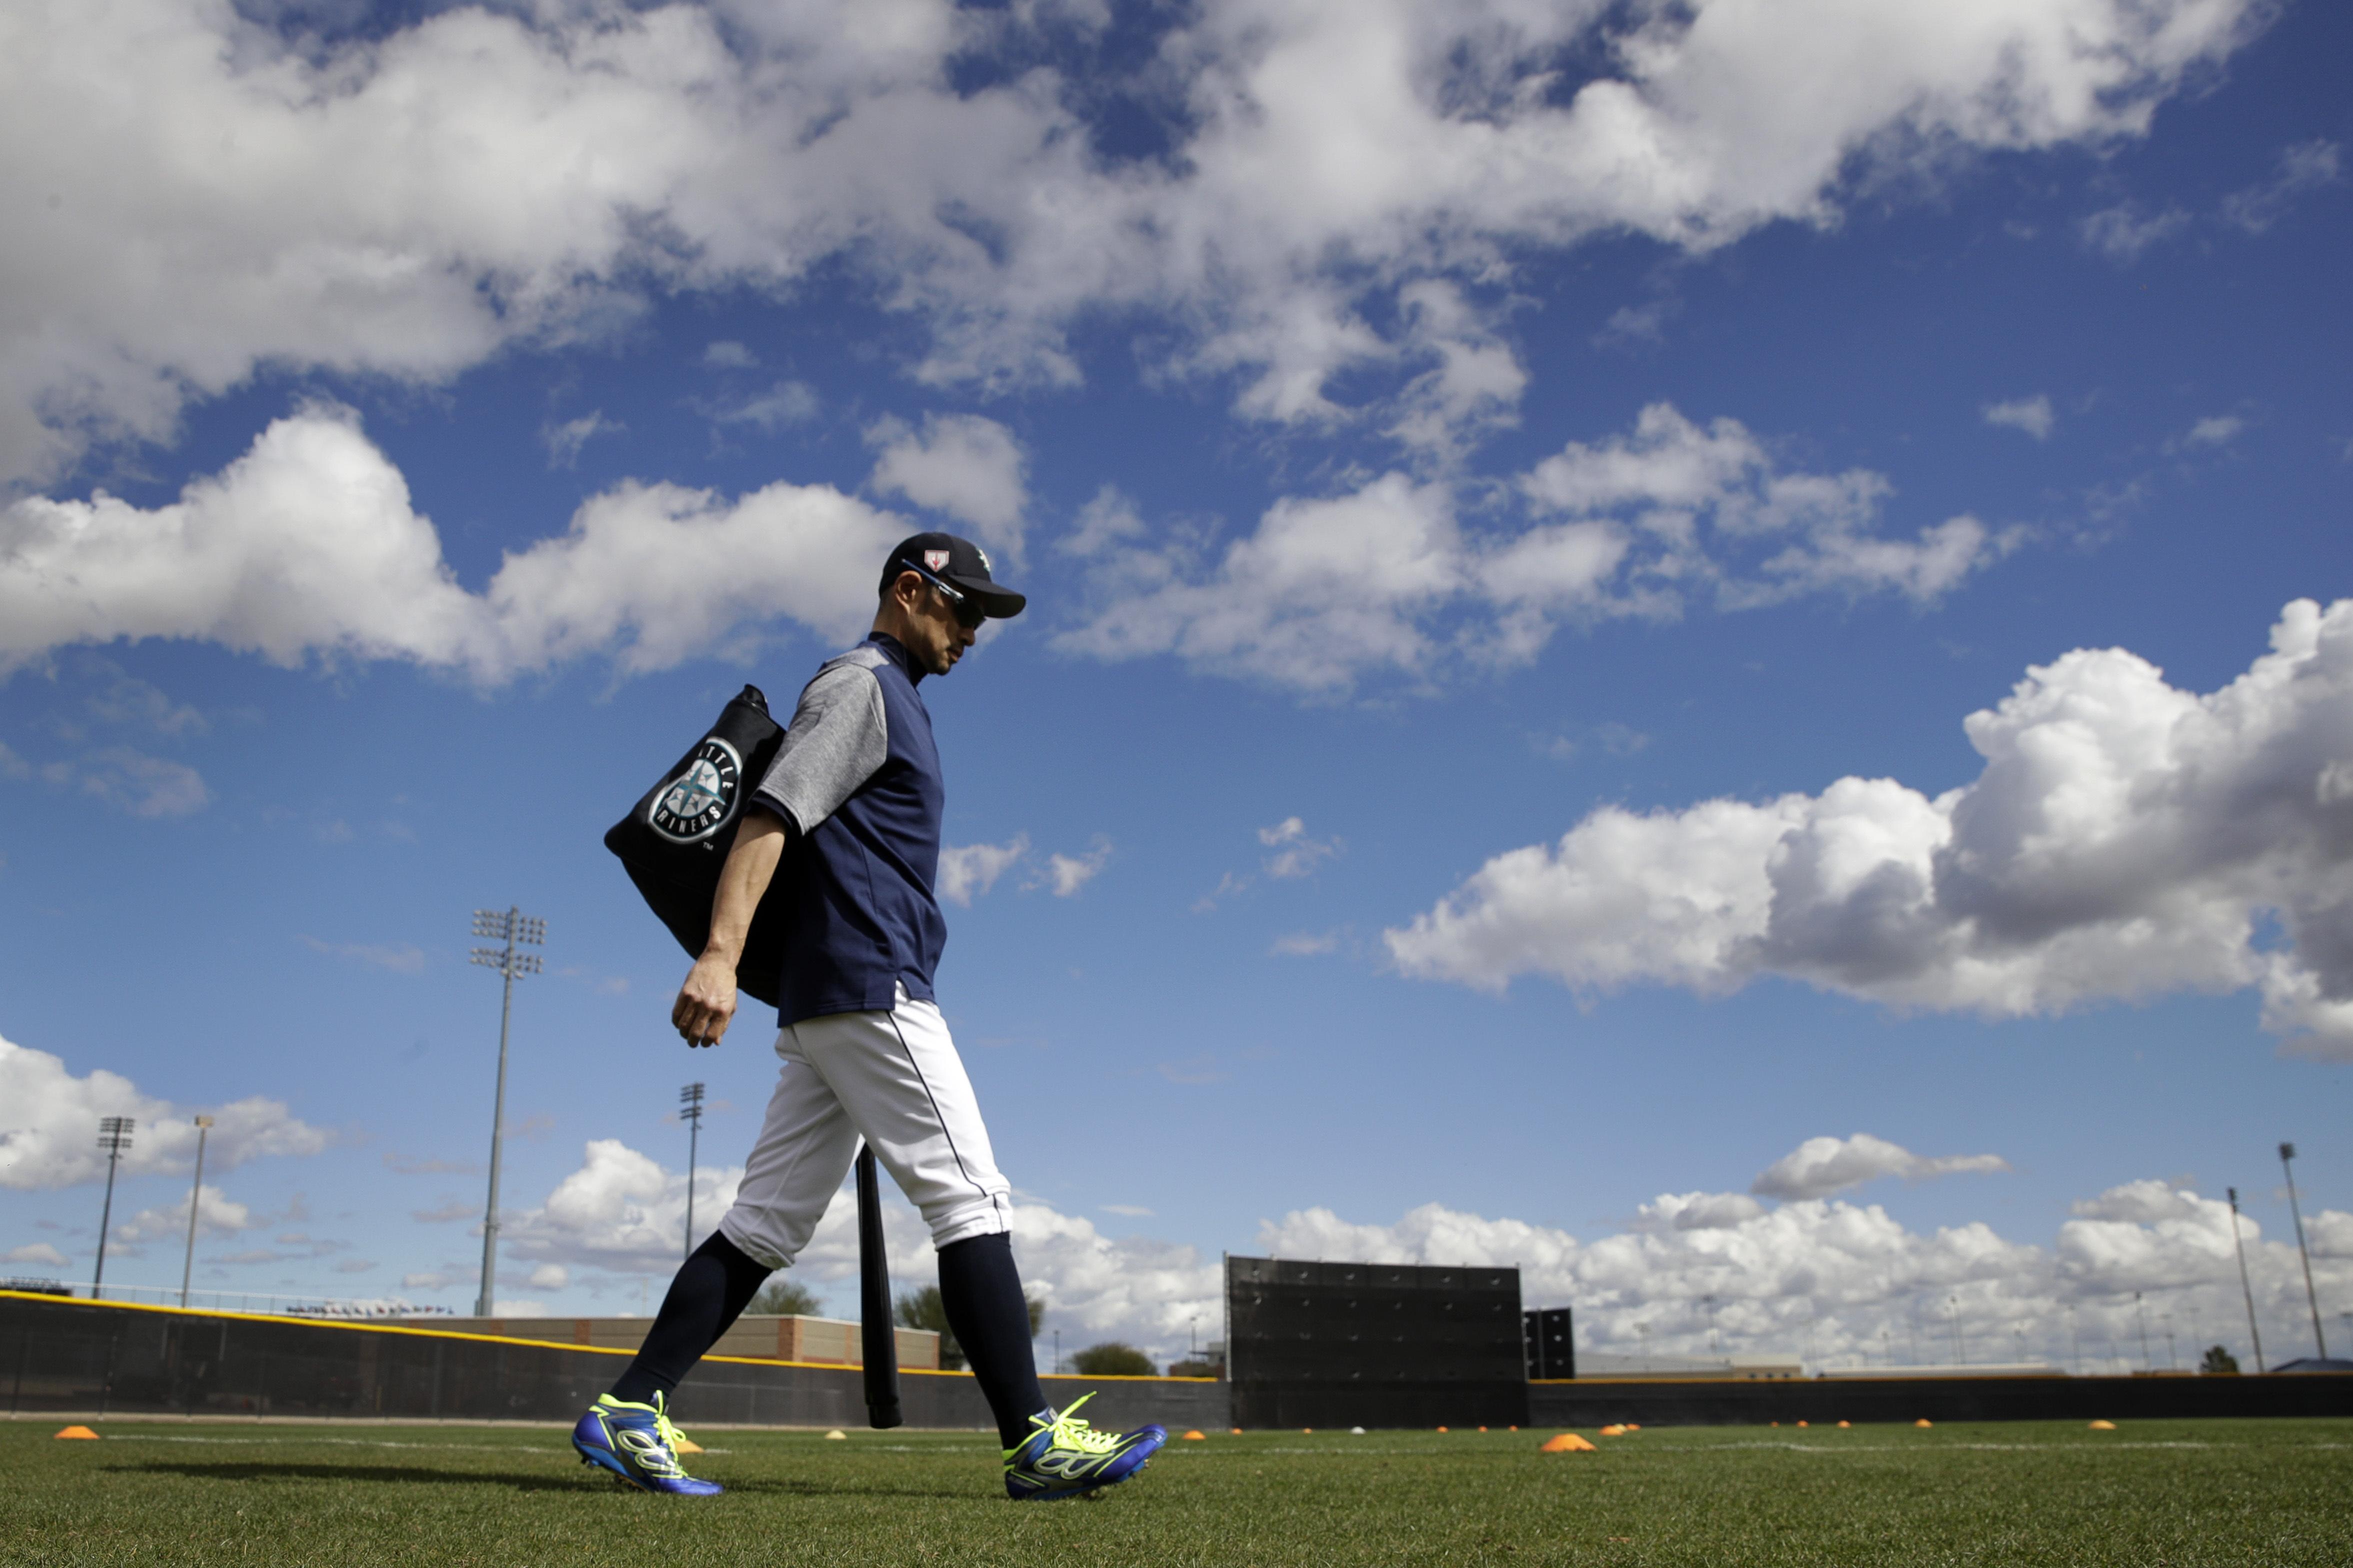 Ichiro back in Mariners’ camp at 45 with chance to play at home The